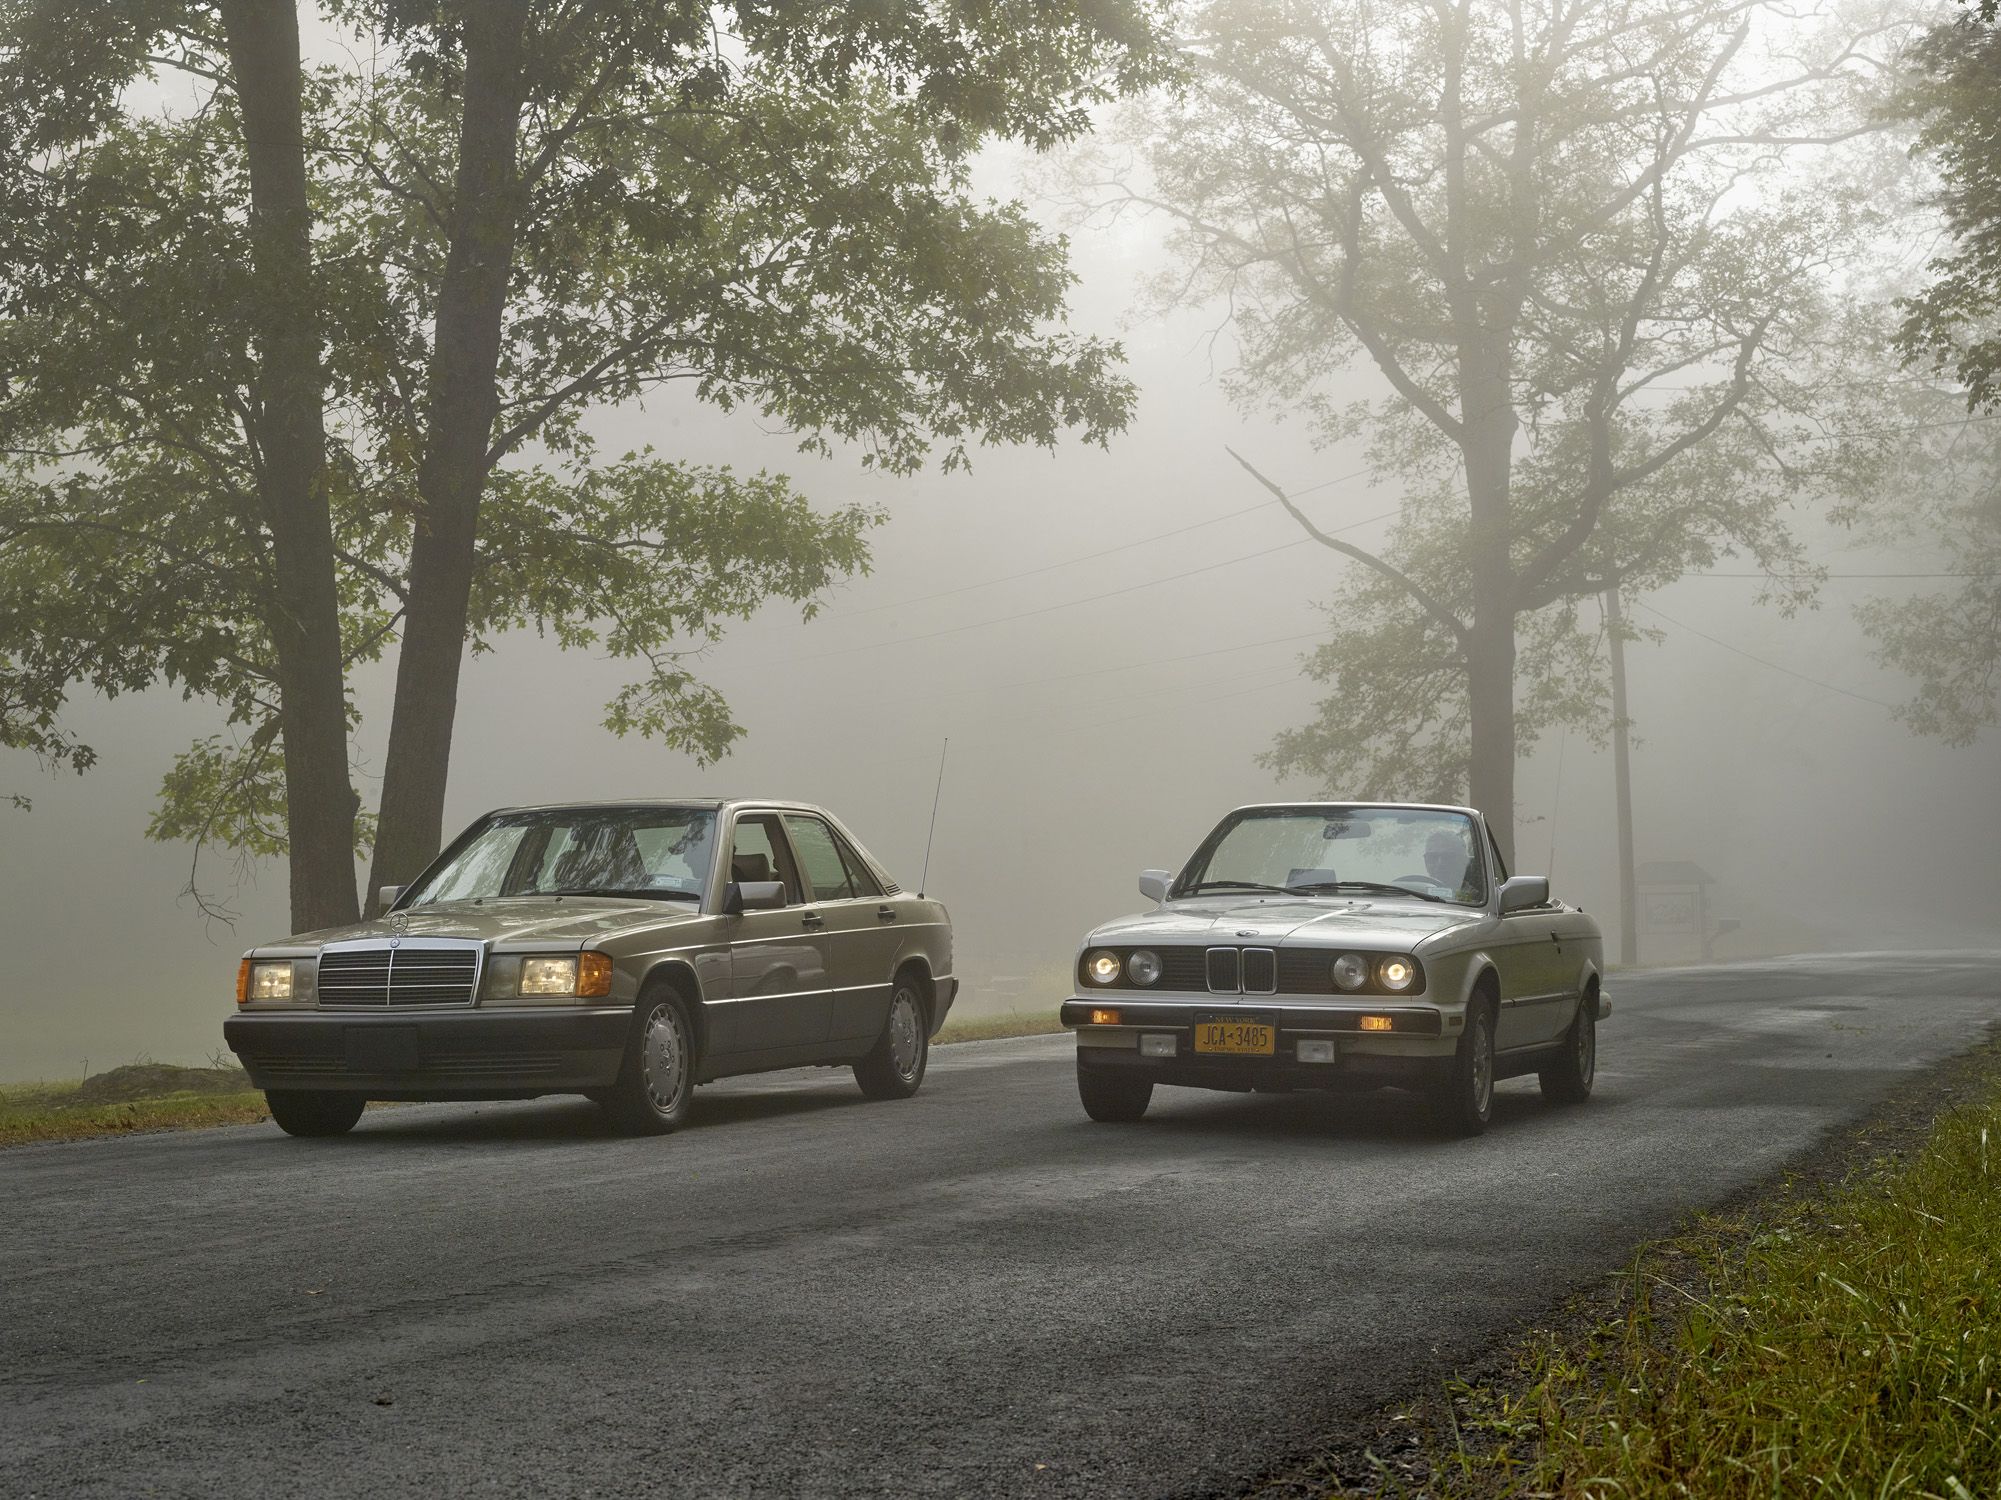 1991 Mercedes-Benz 190E and 1989 BMW 325i in a Flashback Matchup